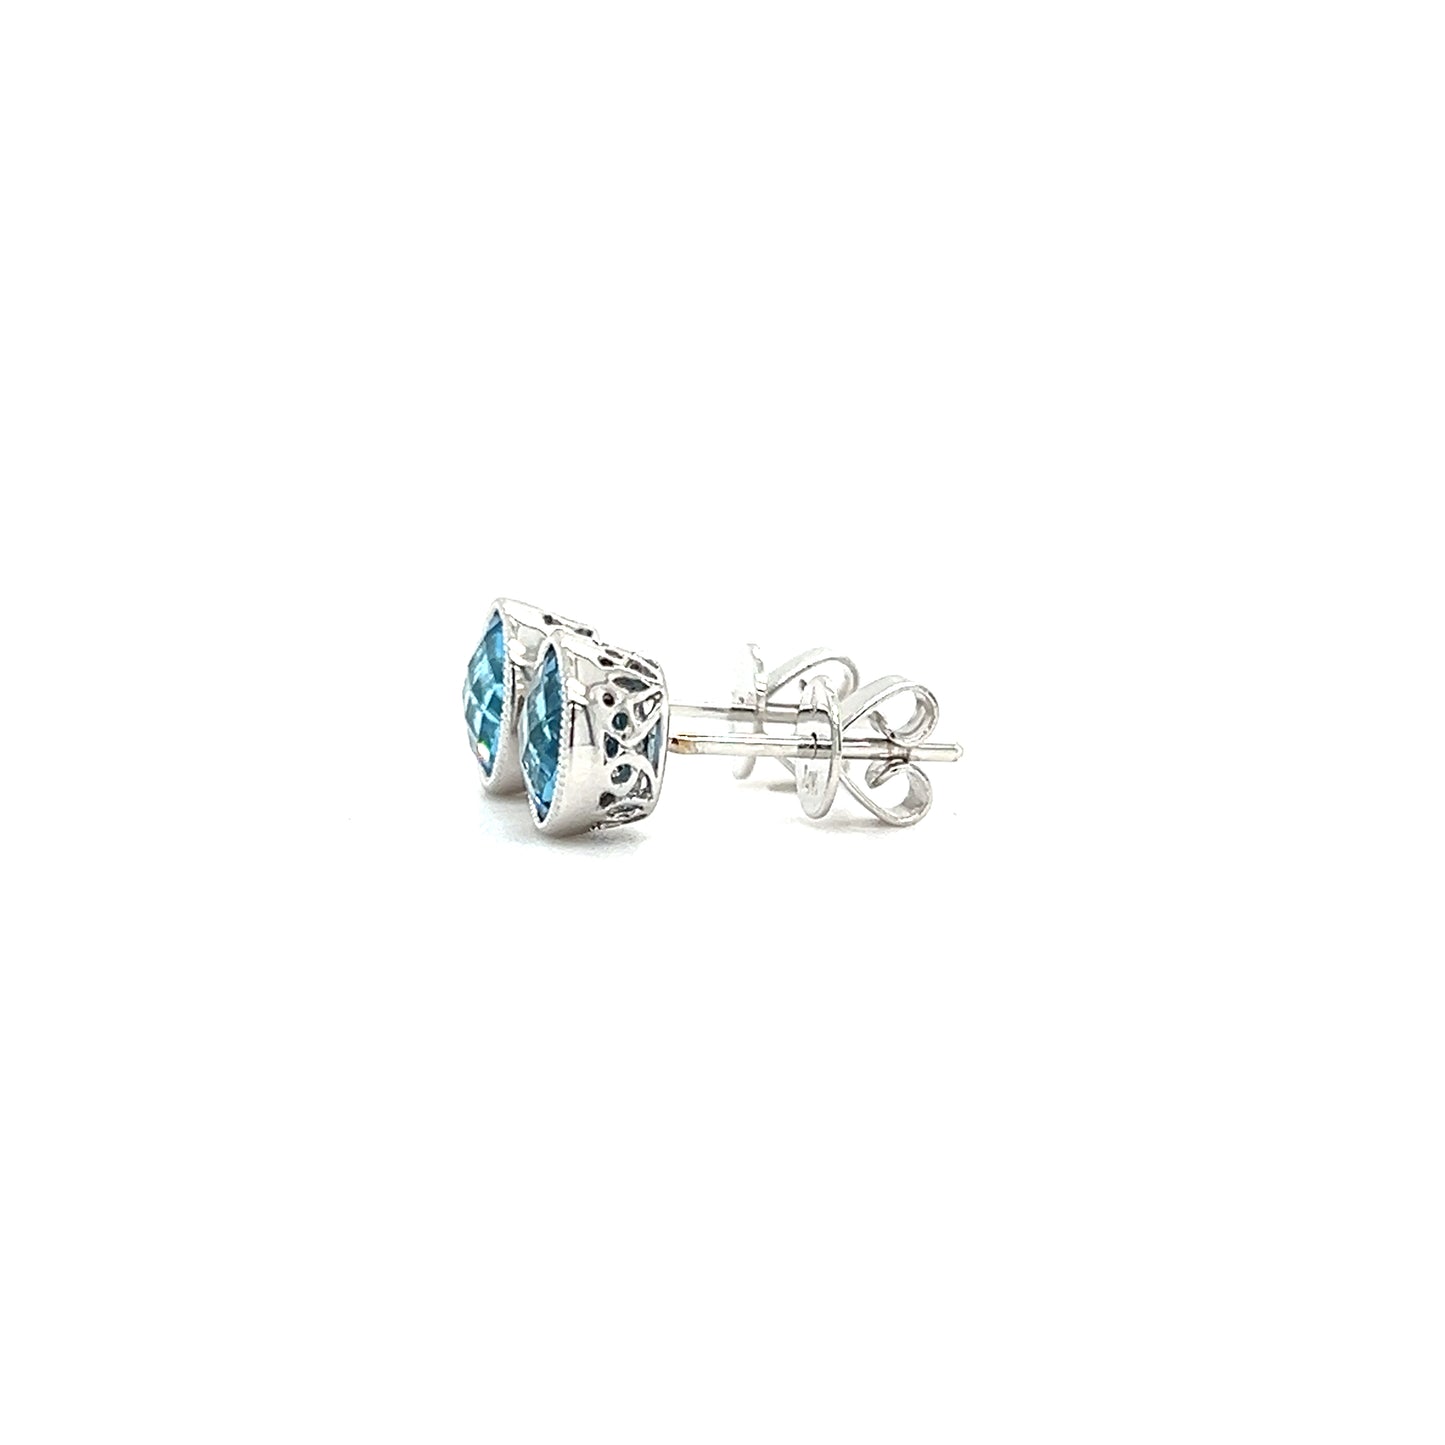 Blue Topaz Stud Earrings with Filigree and Milgrain Details in 14K White Gold Right Profile View